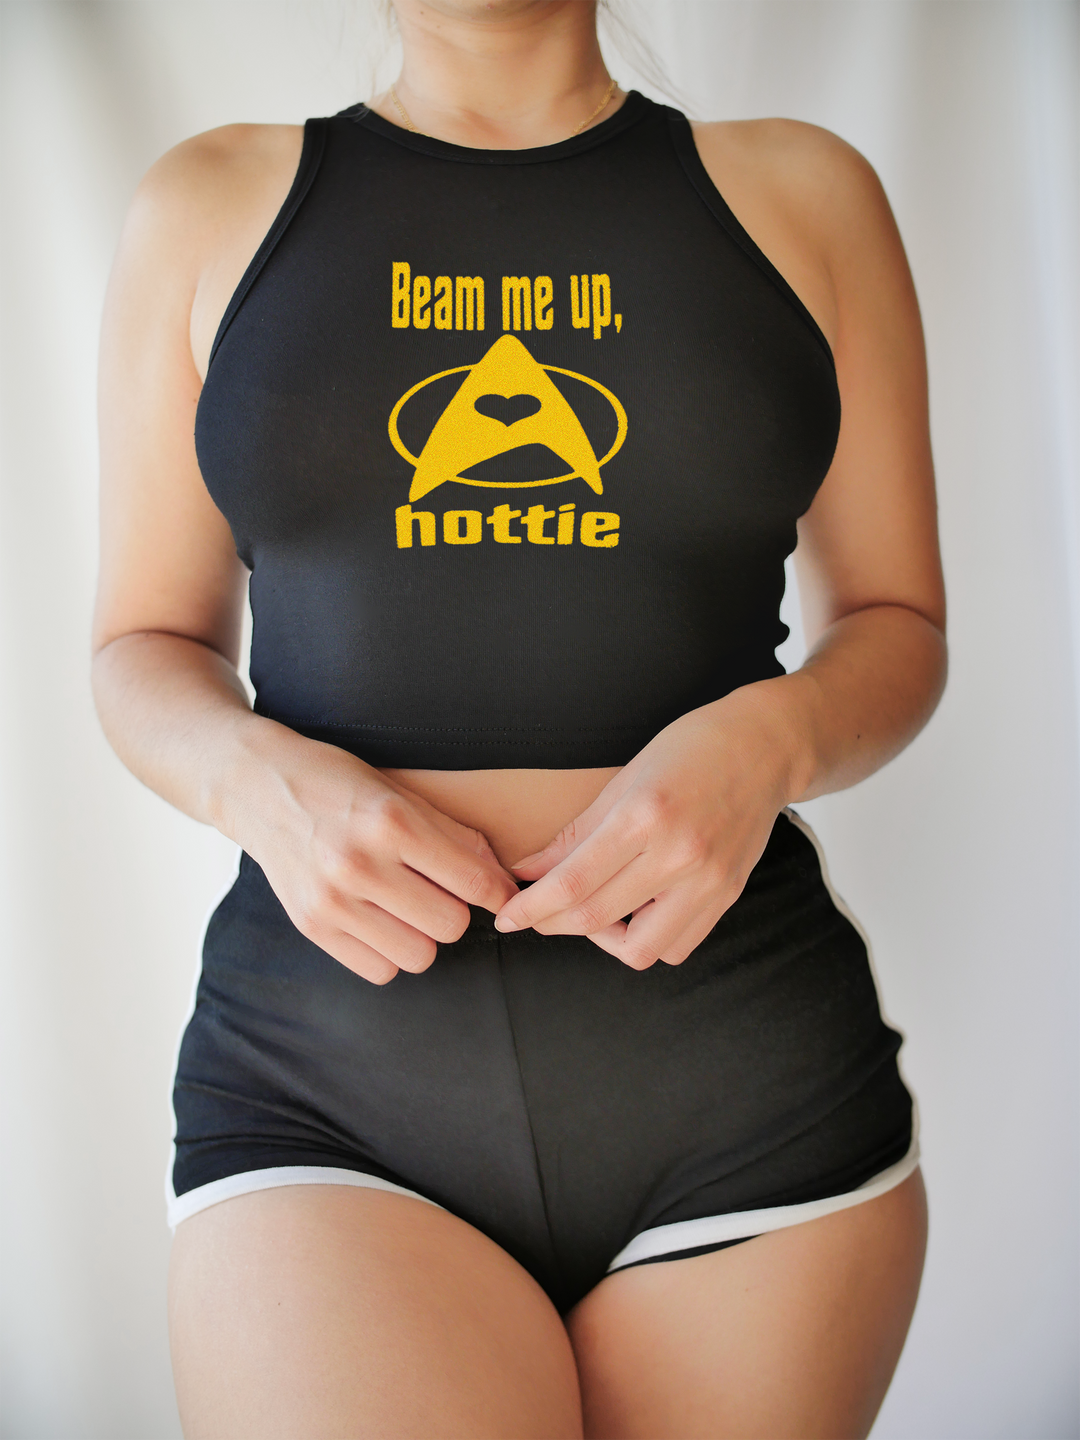 Beam Me Up, Hottie Cropped Tank Top